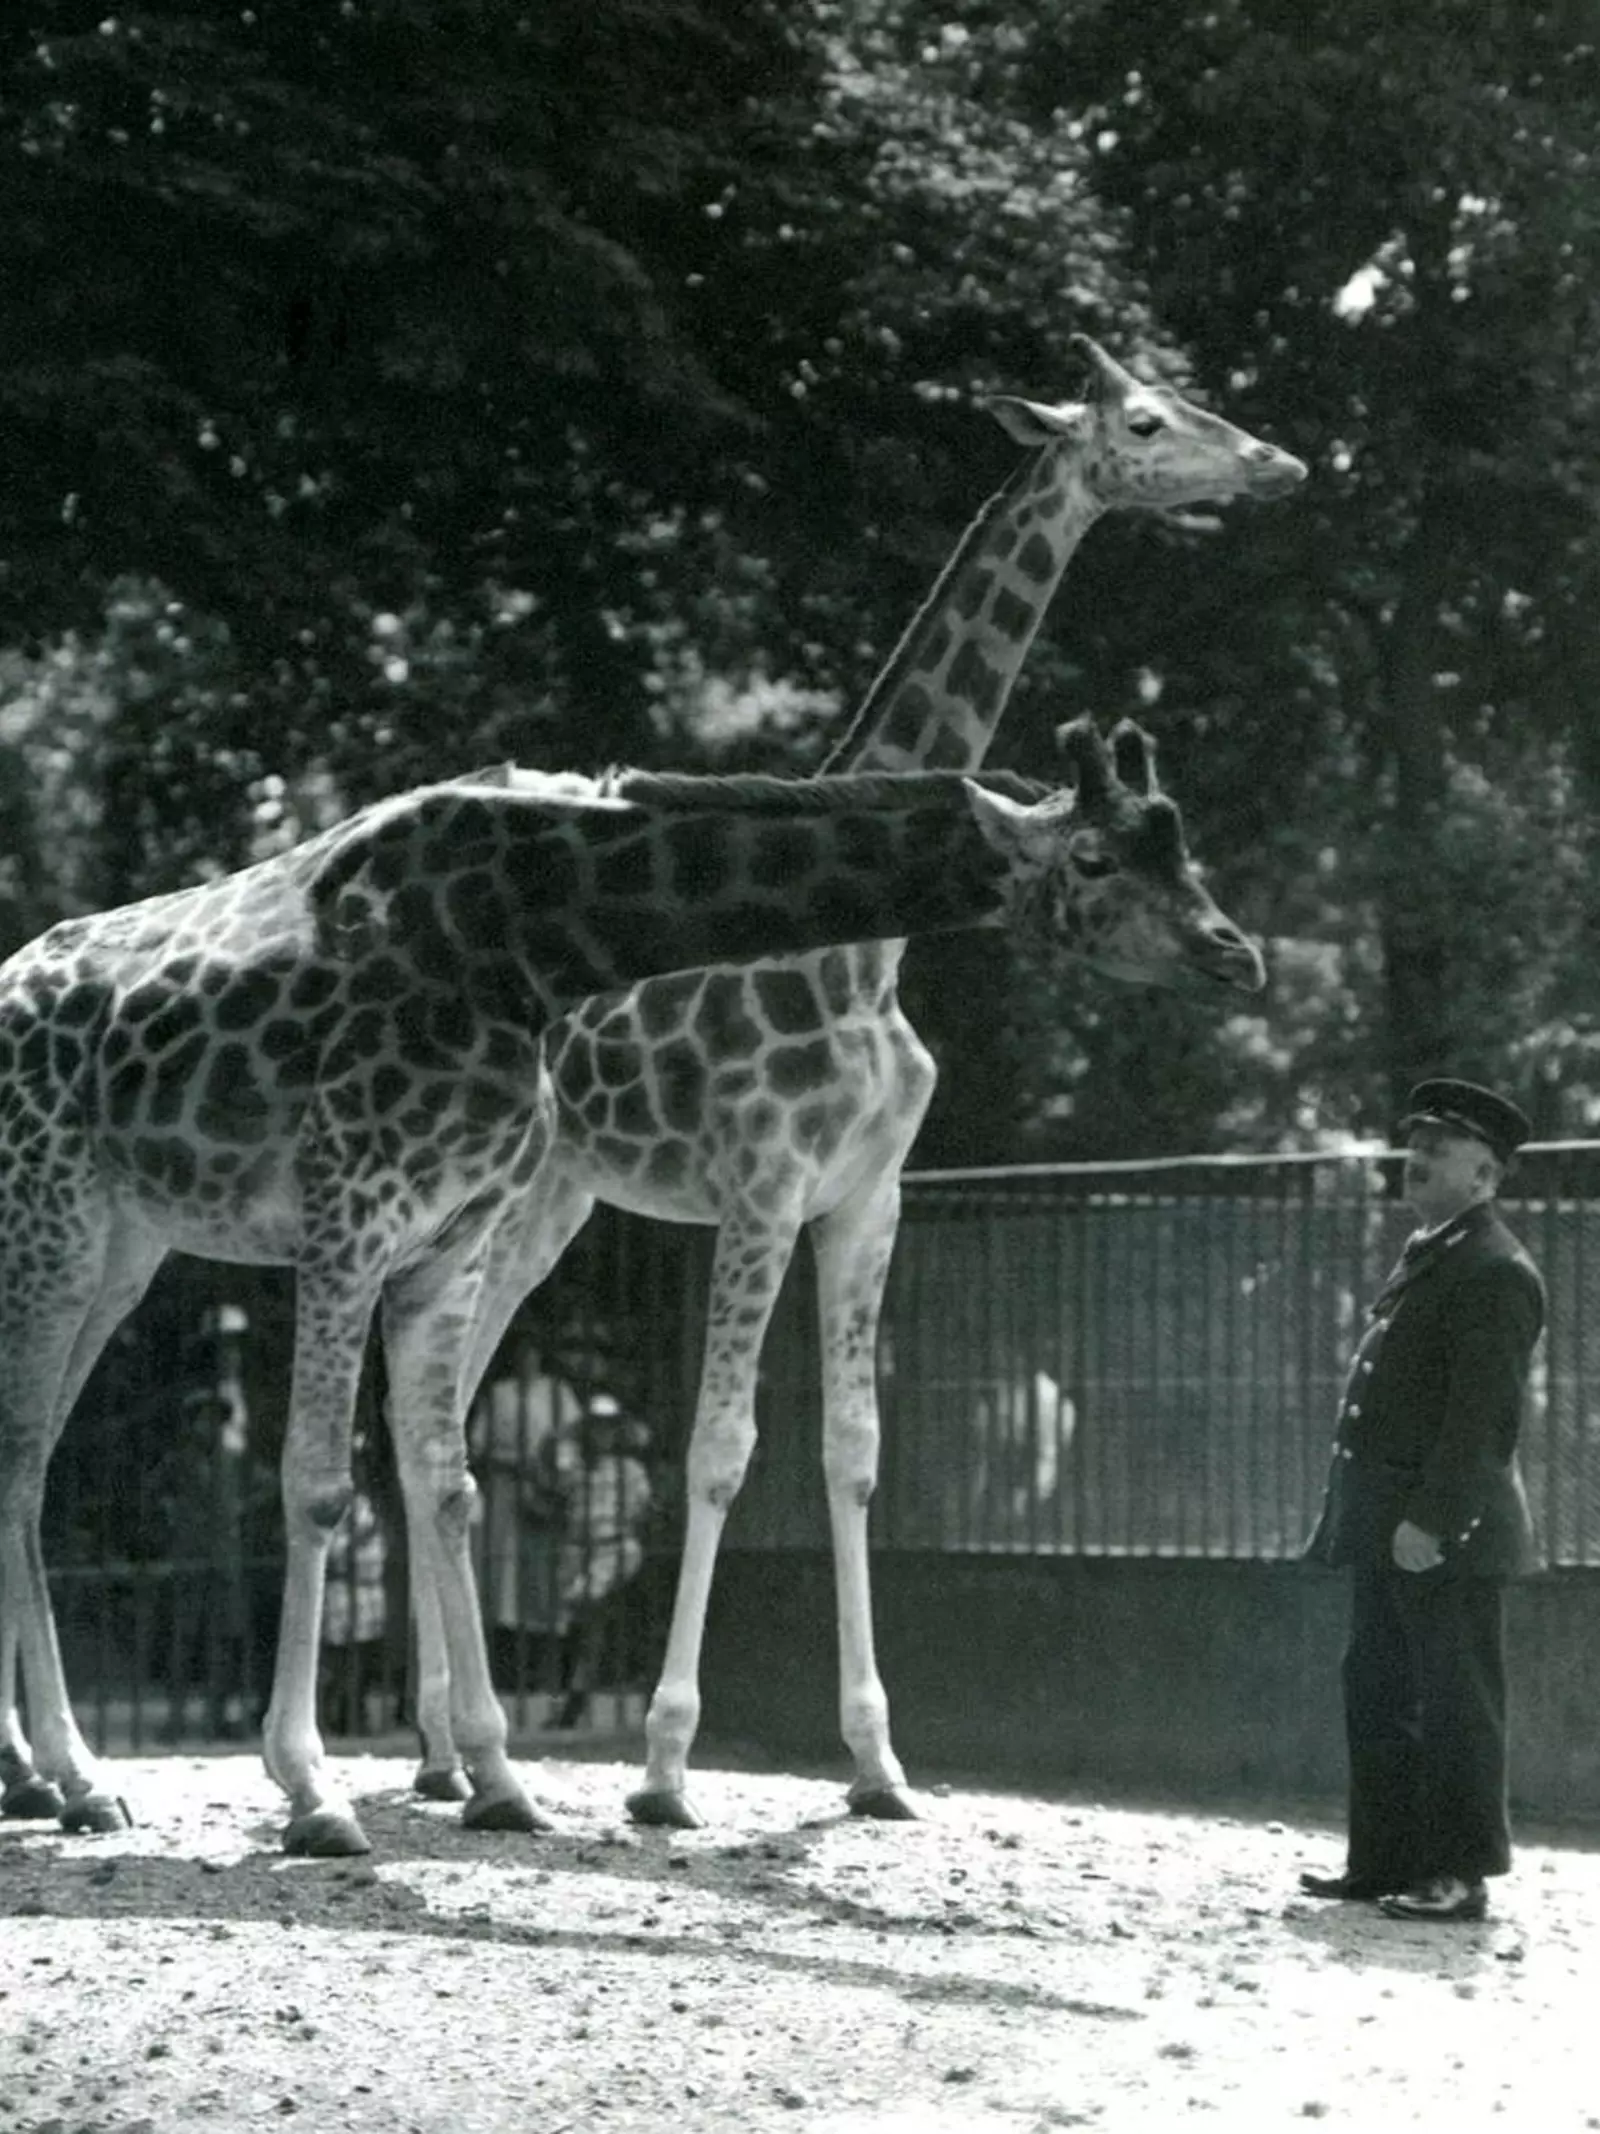 London zoo history photo of two giraffes with a zookeeper in a suit and hat.